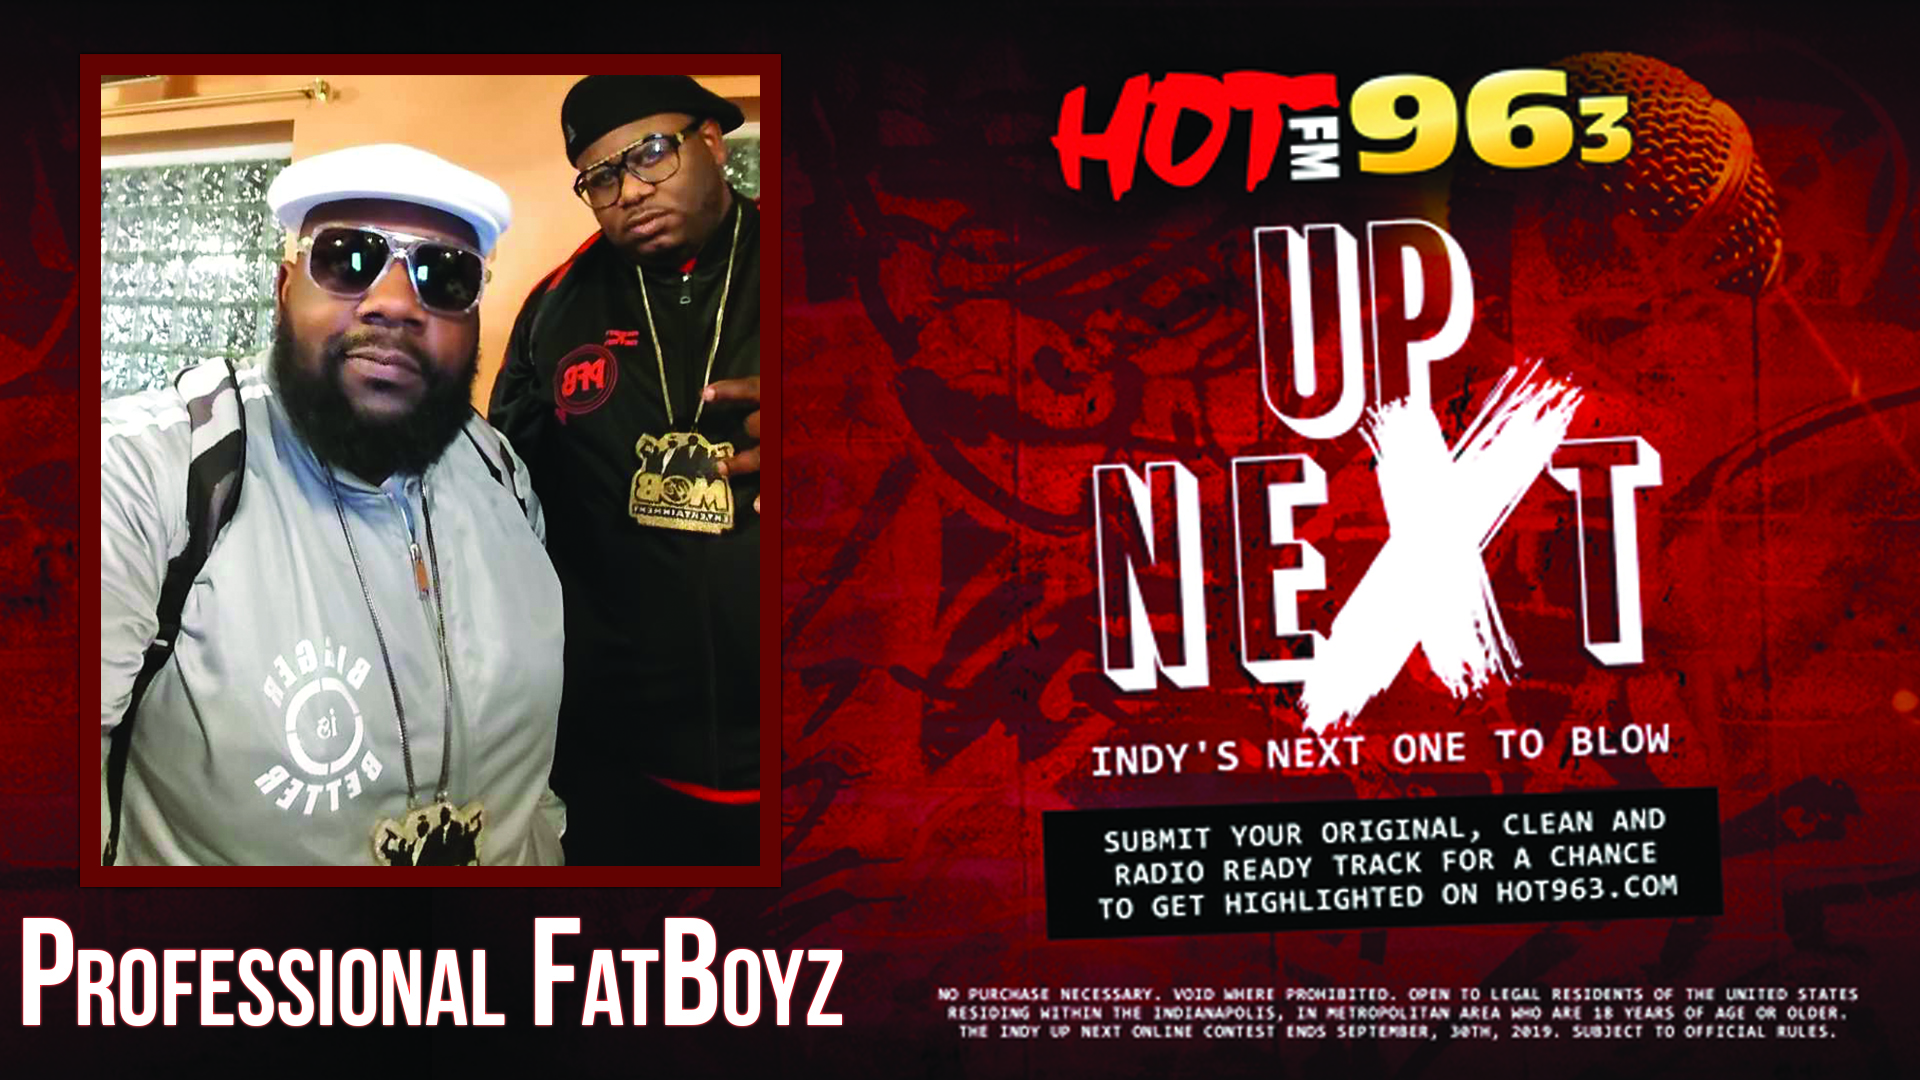 Up Next: Indy's Next One To Blow: Professional FatBoyz